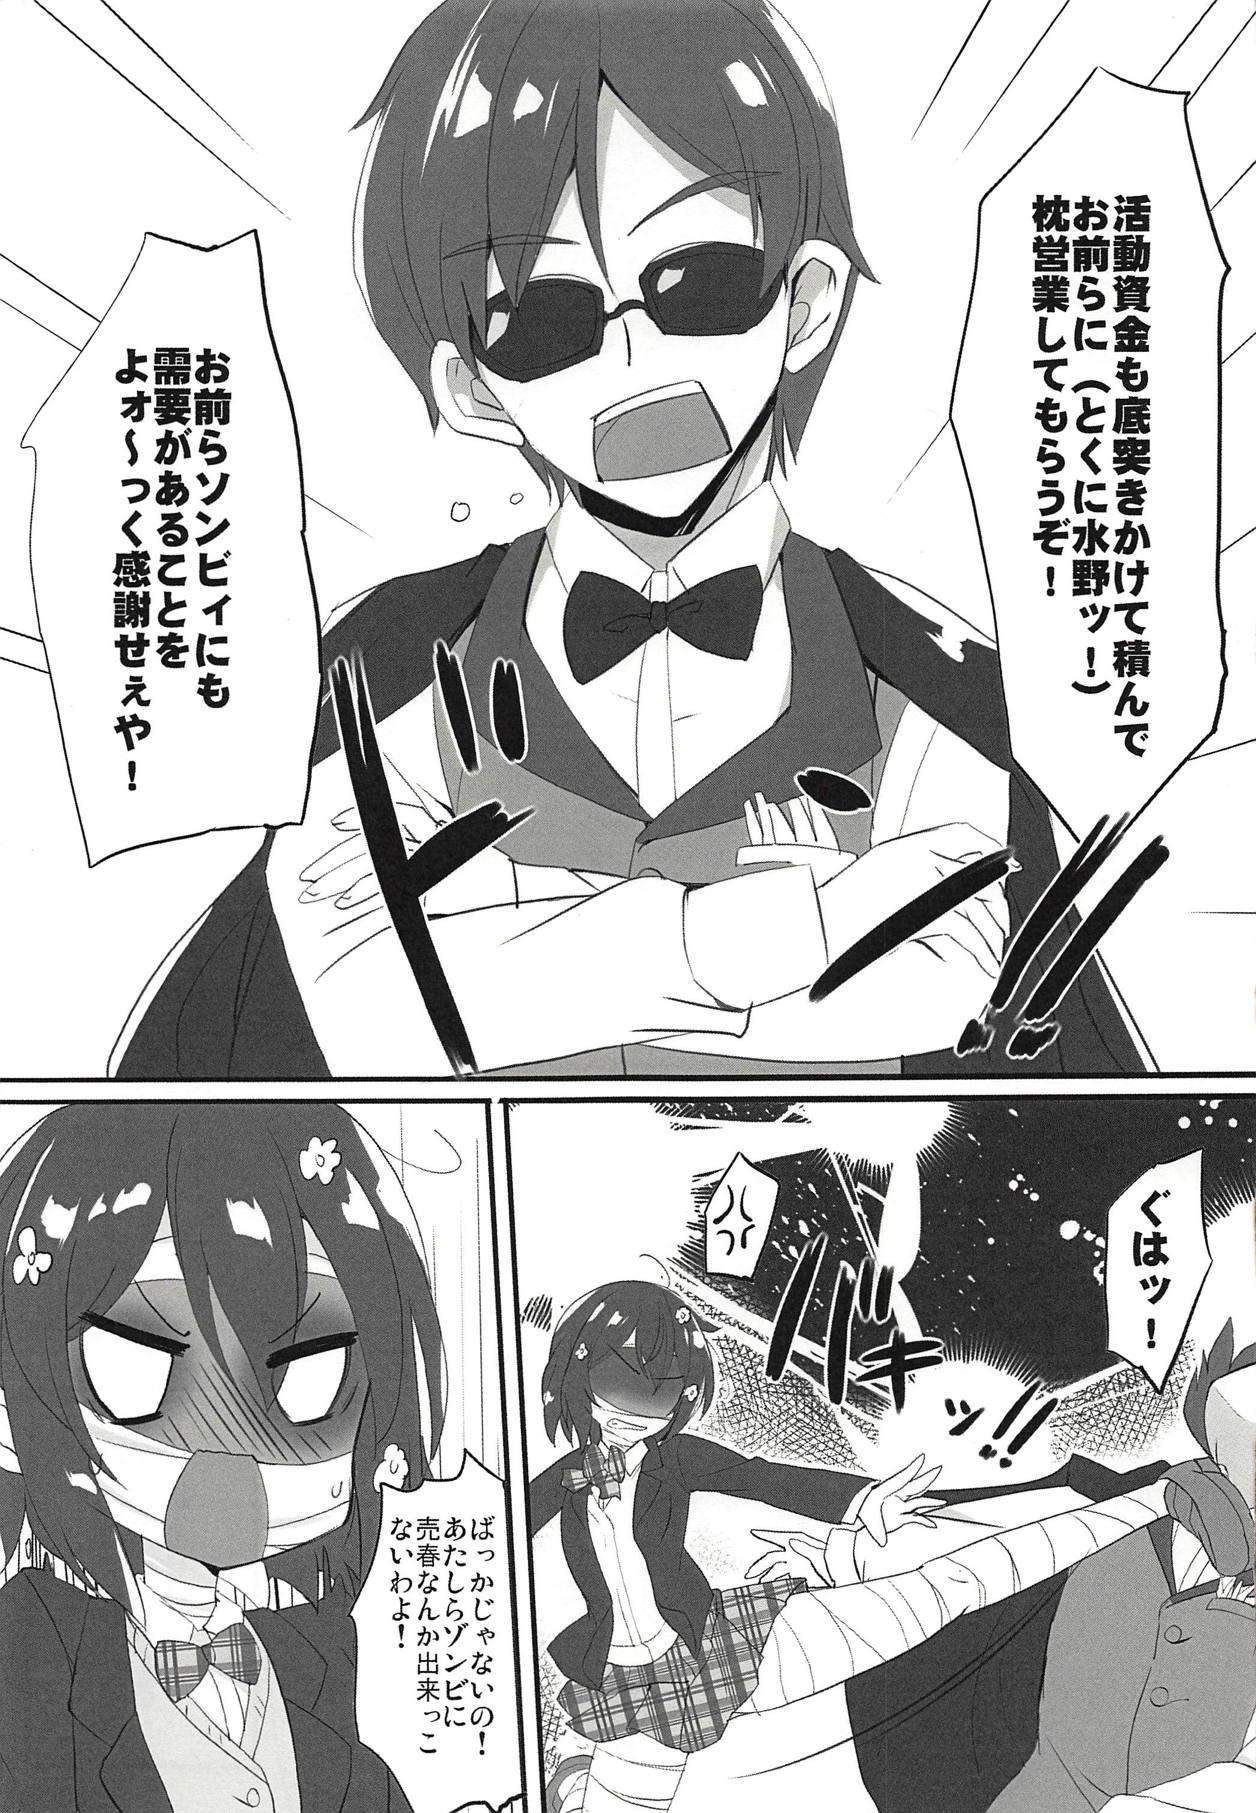 No Condom GOOD and EVIL - Zombie land saga Amateurs Gone Wild - Page 4